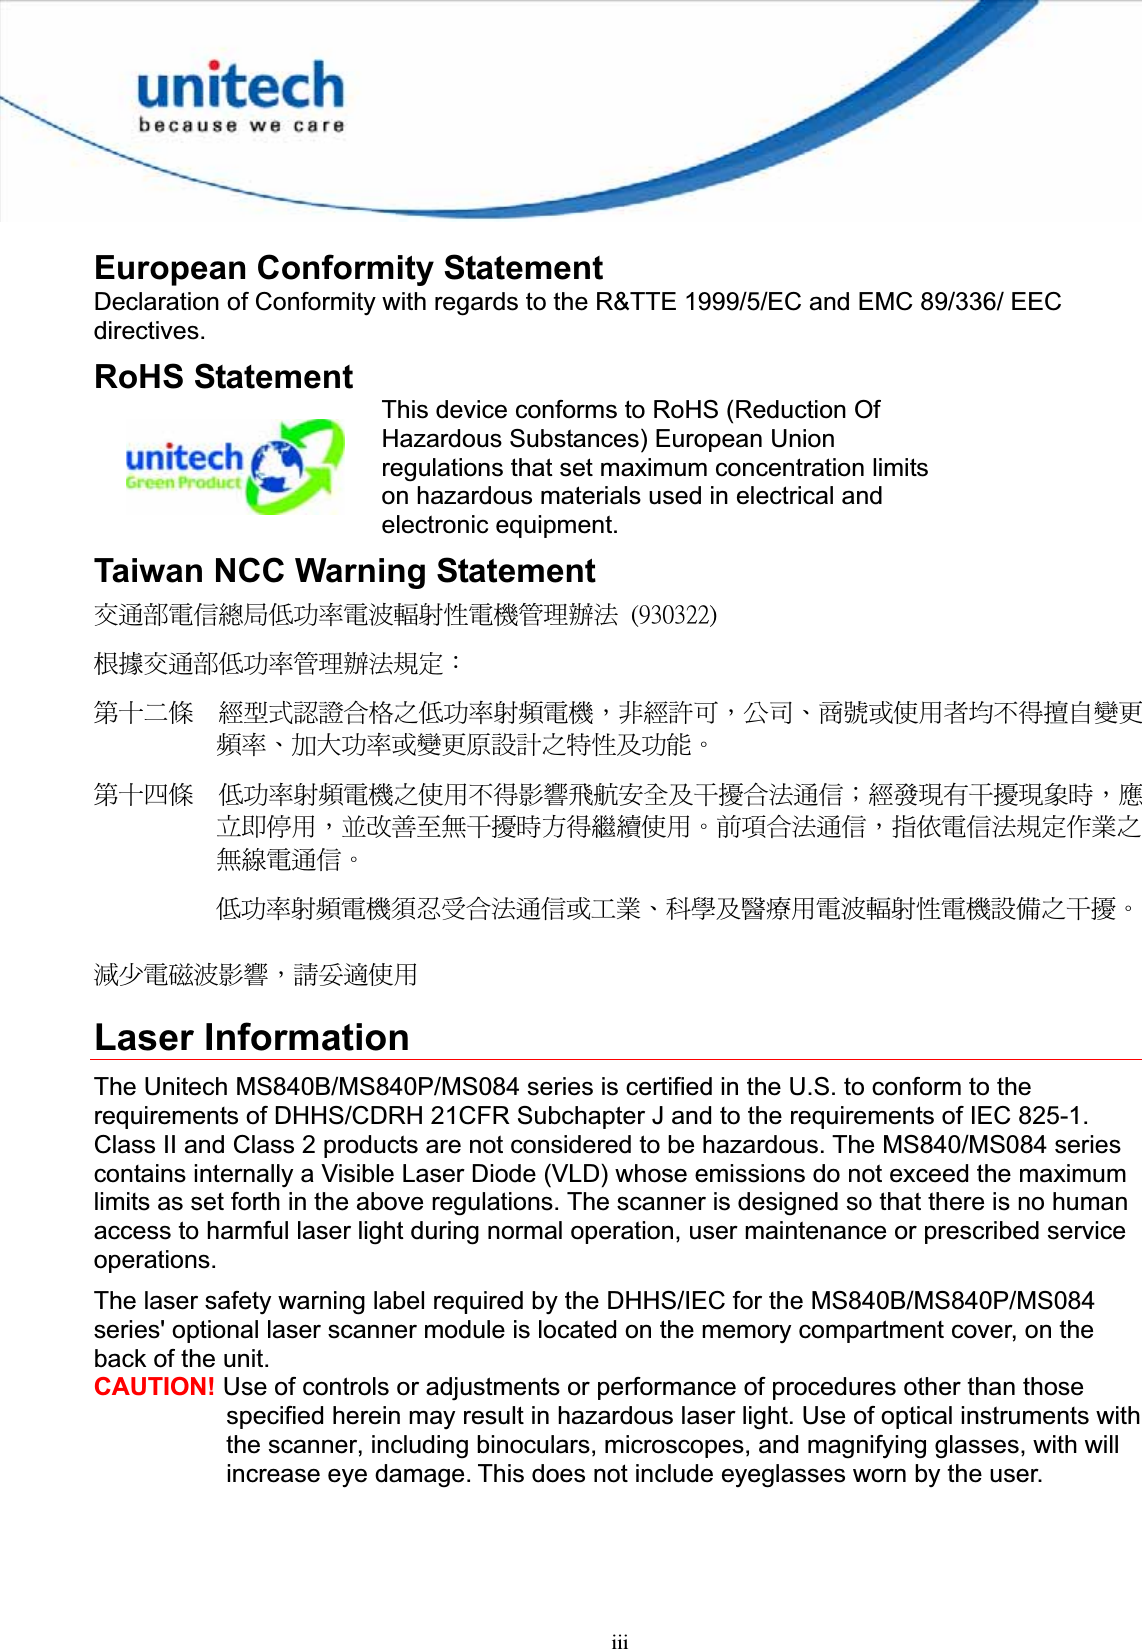 iiiEuropean Conformity Statement Declaration of Conformity with regards to the R&amp;TTE 1999/5/EC and EMC 89/336/ EEC directives.RoHS Statement This device conforms to RoHS (Reduction Of Hazardous Substances) European Union regulations that set maximum concentration limits on hazardous materials used in electrical and electronic equipment. Taiwan NCC Warning Statement ٌຏຝሽॾ᜔ݝ܅פ෷ሽंᘿ୴ࢤሽᖲጥ෻ᙄऄʳ ʻˌˆ˃ˆ˅˅ʼʳ௅ᖕٌຏຝ܅פ෷ጥ෻ᙄऄ๵ࡳΚʳรԼԲයʳ ᆖীڤᎁᢞٽ௑հ܅פ෷୴᙮ሽᖲΔॺᆖ๺ױΔֆ׹Ε೸ᇆࢨࠌشृ݁լ൓ᖐ۞᧢ޓ᙮෷ΕףՕפ෷ࢨ᧢ޓ଺๻ૠհ௽ࢤ֗פ౨ΖʳรԼ؄යʳ ܅פ෷୴᙮ሽᖲհࠌشլ൓ᐙ᥼ଆ౰ڜ٤֗եឫٽऄຏॾΙᆖ࿇෼ڶեឫ෼ွழΔᚨمܛೖشΔࠀޏ࿳۟ྤեឫழֱ൓ᤉᥛࠌشΖছႈٽऄຏॾΔਐࠉሽॾऄ๵ࡳ܂ᄐհྤᒵሽຏॾΖʳ܅פ෷୴᙮ሽᖲႊݴ࠹ٽऄຏॾࢨՠᄐΕઝᖂ֗᠔᛭شሽंᘿ୴ࢤሽᖲ๻ໂհեឫΖʳ྇֟ሽ጖ंᐙ᥼ΔᓮݔᔞࠌشʳLaser Information The Unitech MS840B/MS840P/MS084 series is certified in the U.S. to conform to the requirements of DHHS/CDRH 21CFR Subchapter J and to the requirements of IEC 825-1. Class II and Class 2 products are not considered to be hazardous. The MS840/MS084 series contains internally a Visible Laser Diode (VLD) whose emissions do not exceed the maximum limits as set forth in the above regulations. The scanner is designed so that there is no human access to harmful laser light during normal operation, user maintenance or prescribed service operations.The laser safety warning label required by the DHHS/IEC for the MS840B/MS840P/MS084 series&apos; optional laser scanner module is located on the memory compartment cover, on the back of the unit. CAUTION! Use of controls or adjustments or performance of procedures other than those specified herein may result in hazardous laser light. Use of optical instruments with the scanner, including binoculars, microscopes, and magnifying glasses, with will increase eye damage. This does not include eyeglasses worn by the user. 